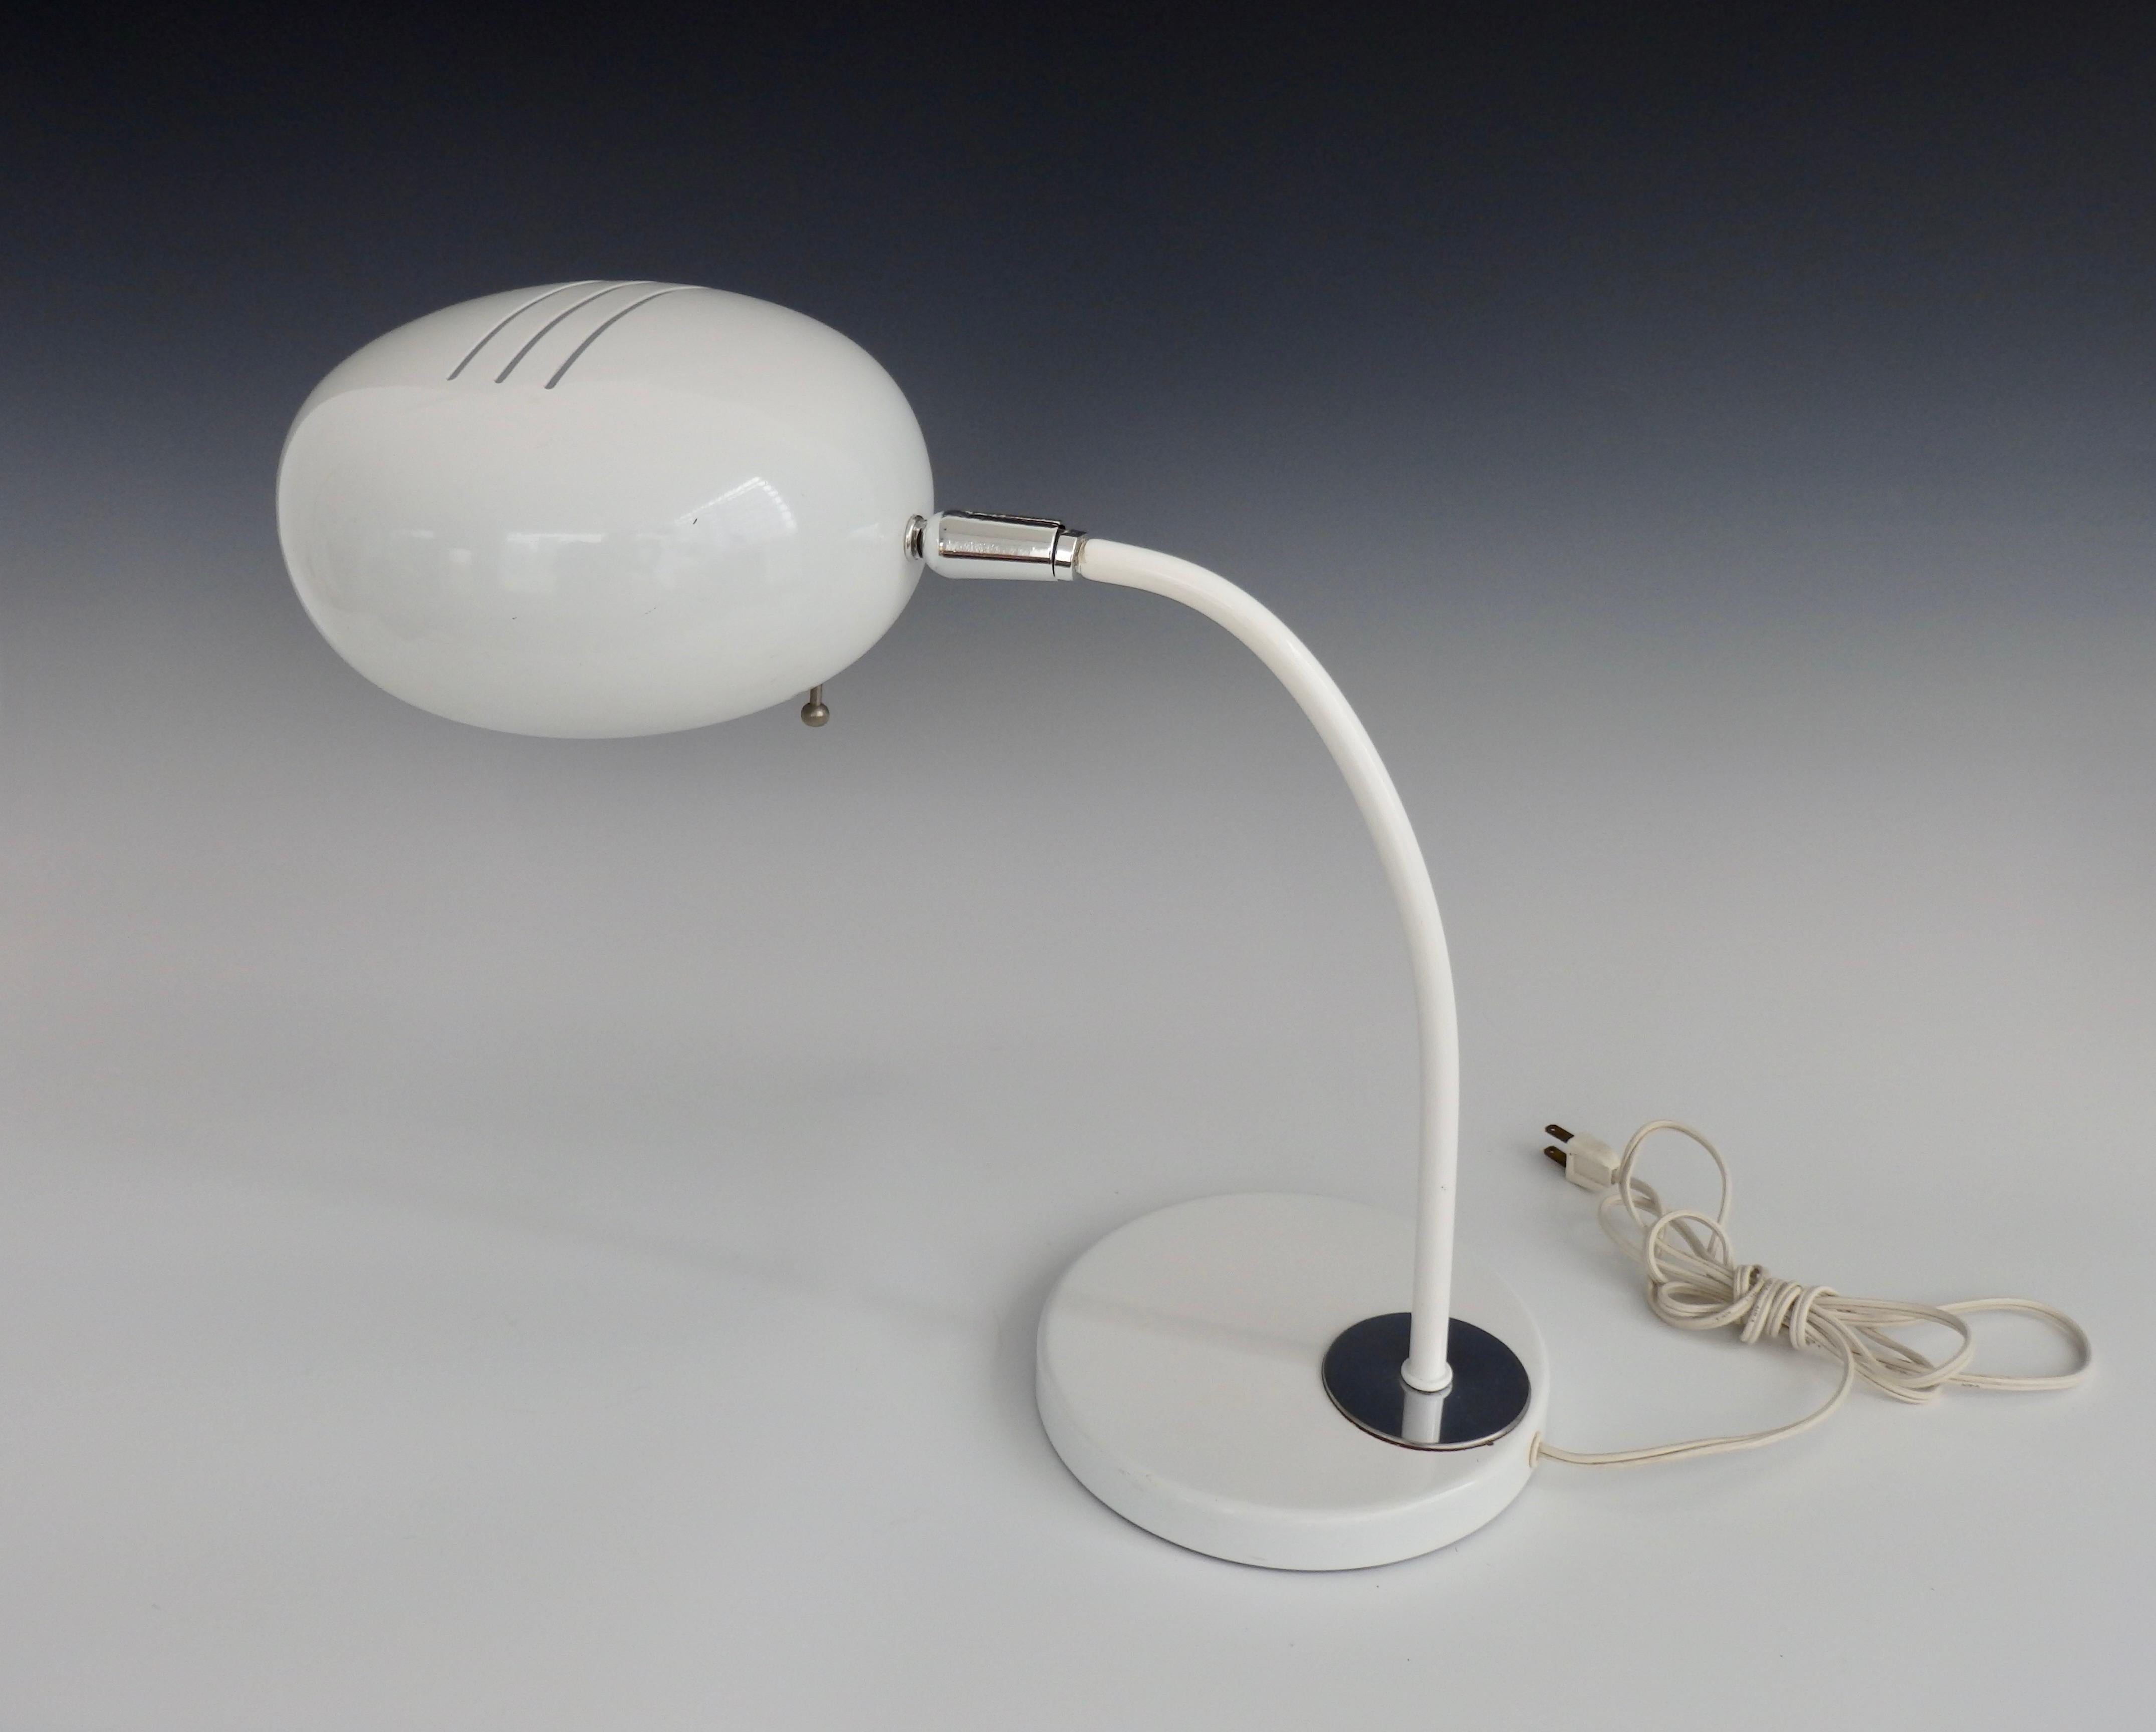 Midcentury White Round Desk Lamp In Good Condition For Sale In Ferndale, MI